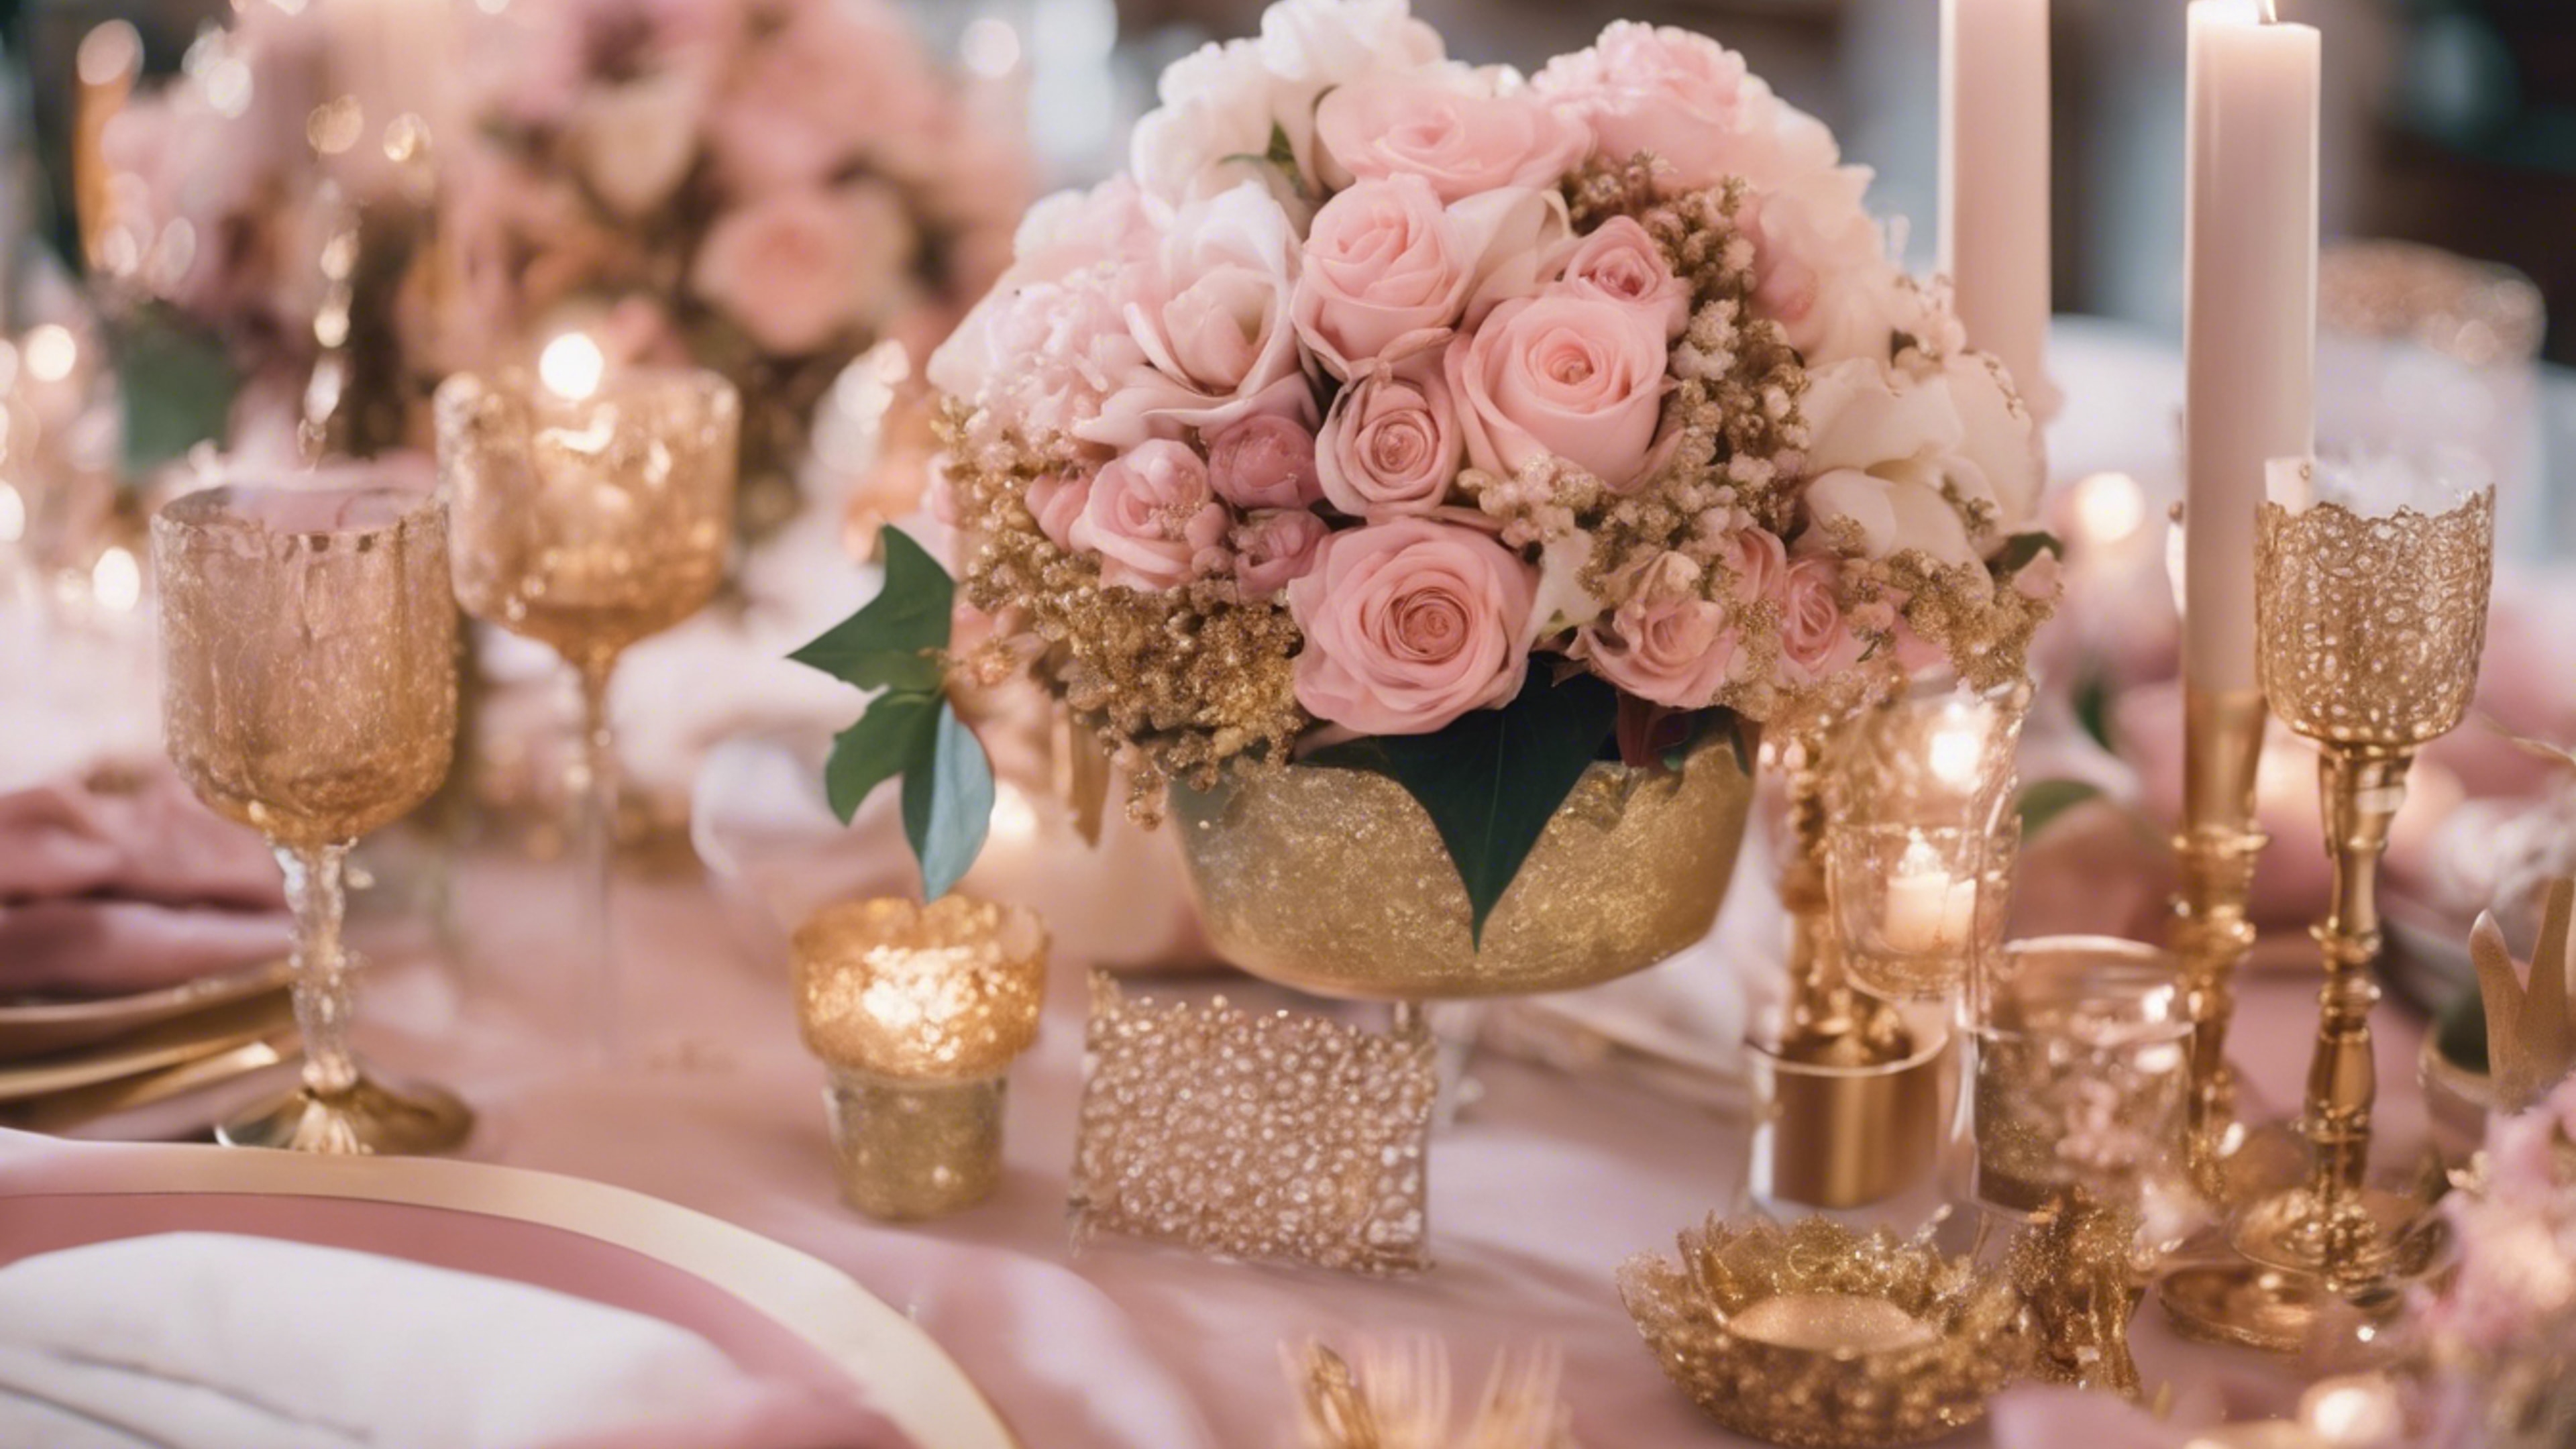 An ethereal pink and gold themed wedding decorations with flowers and metallic accents. Tapet[814998f188fb45f48f1c]